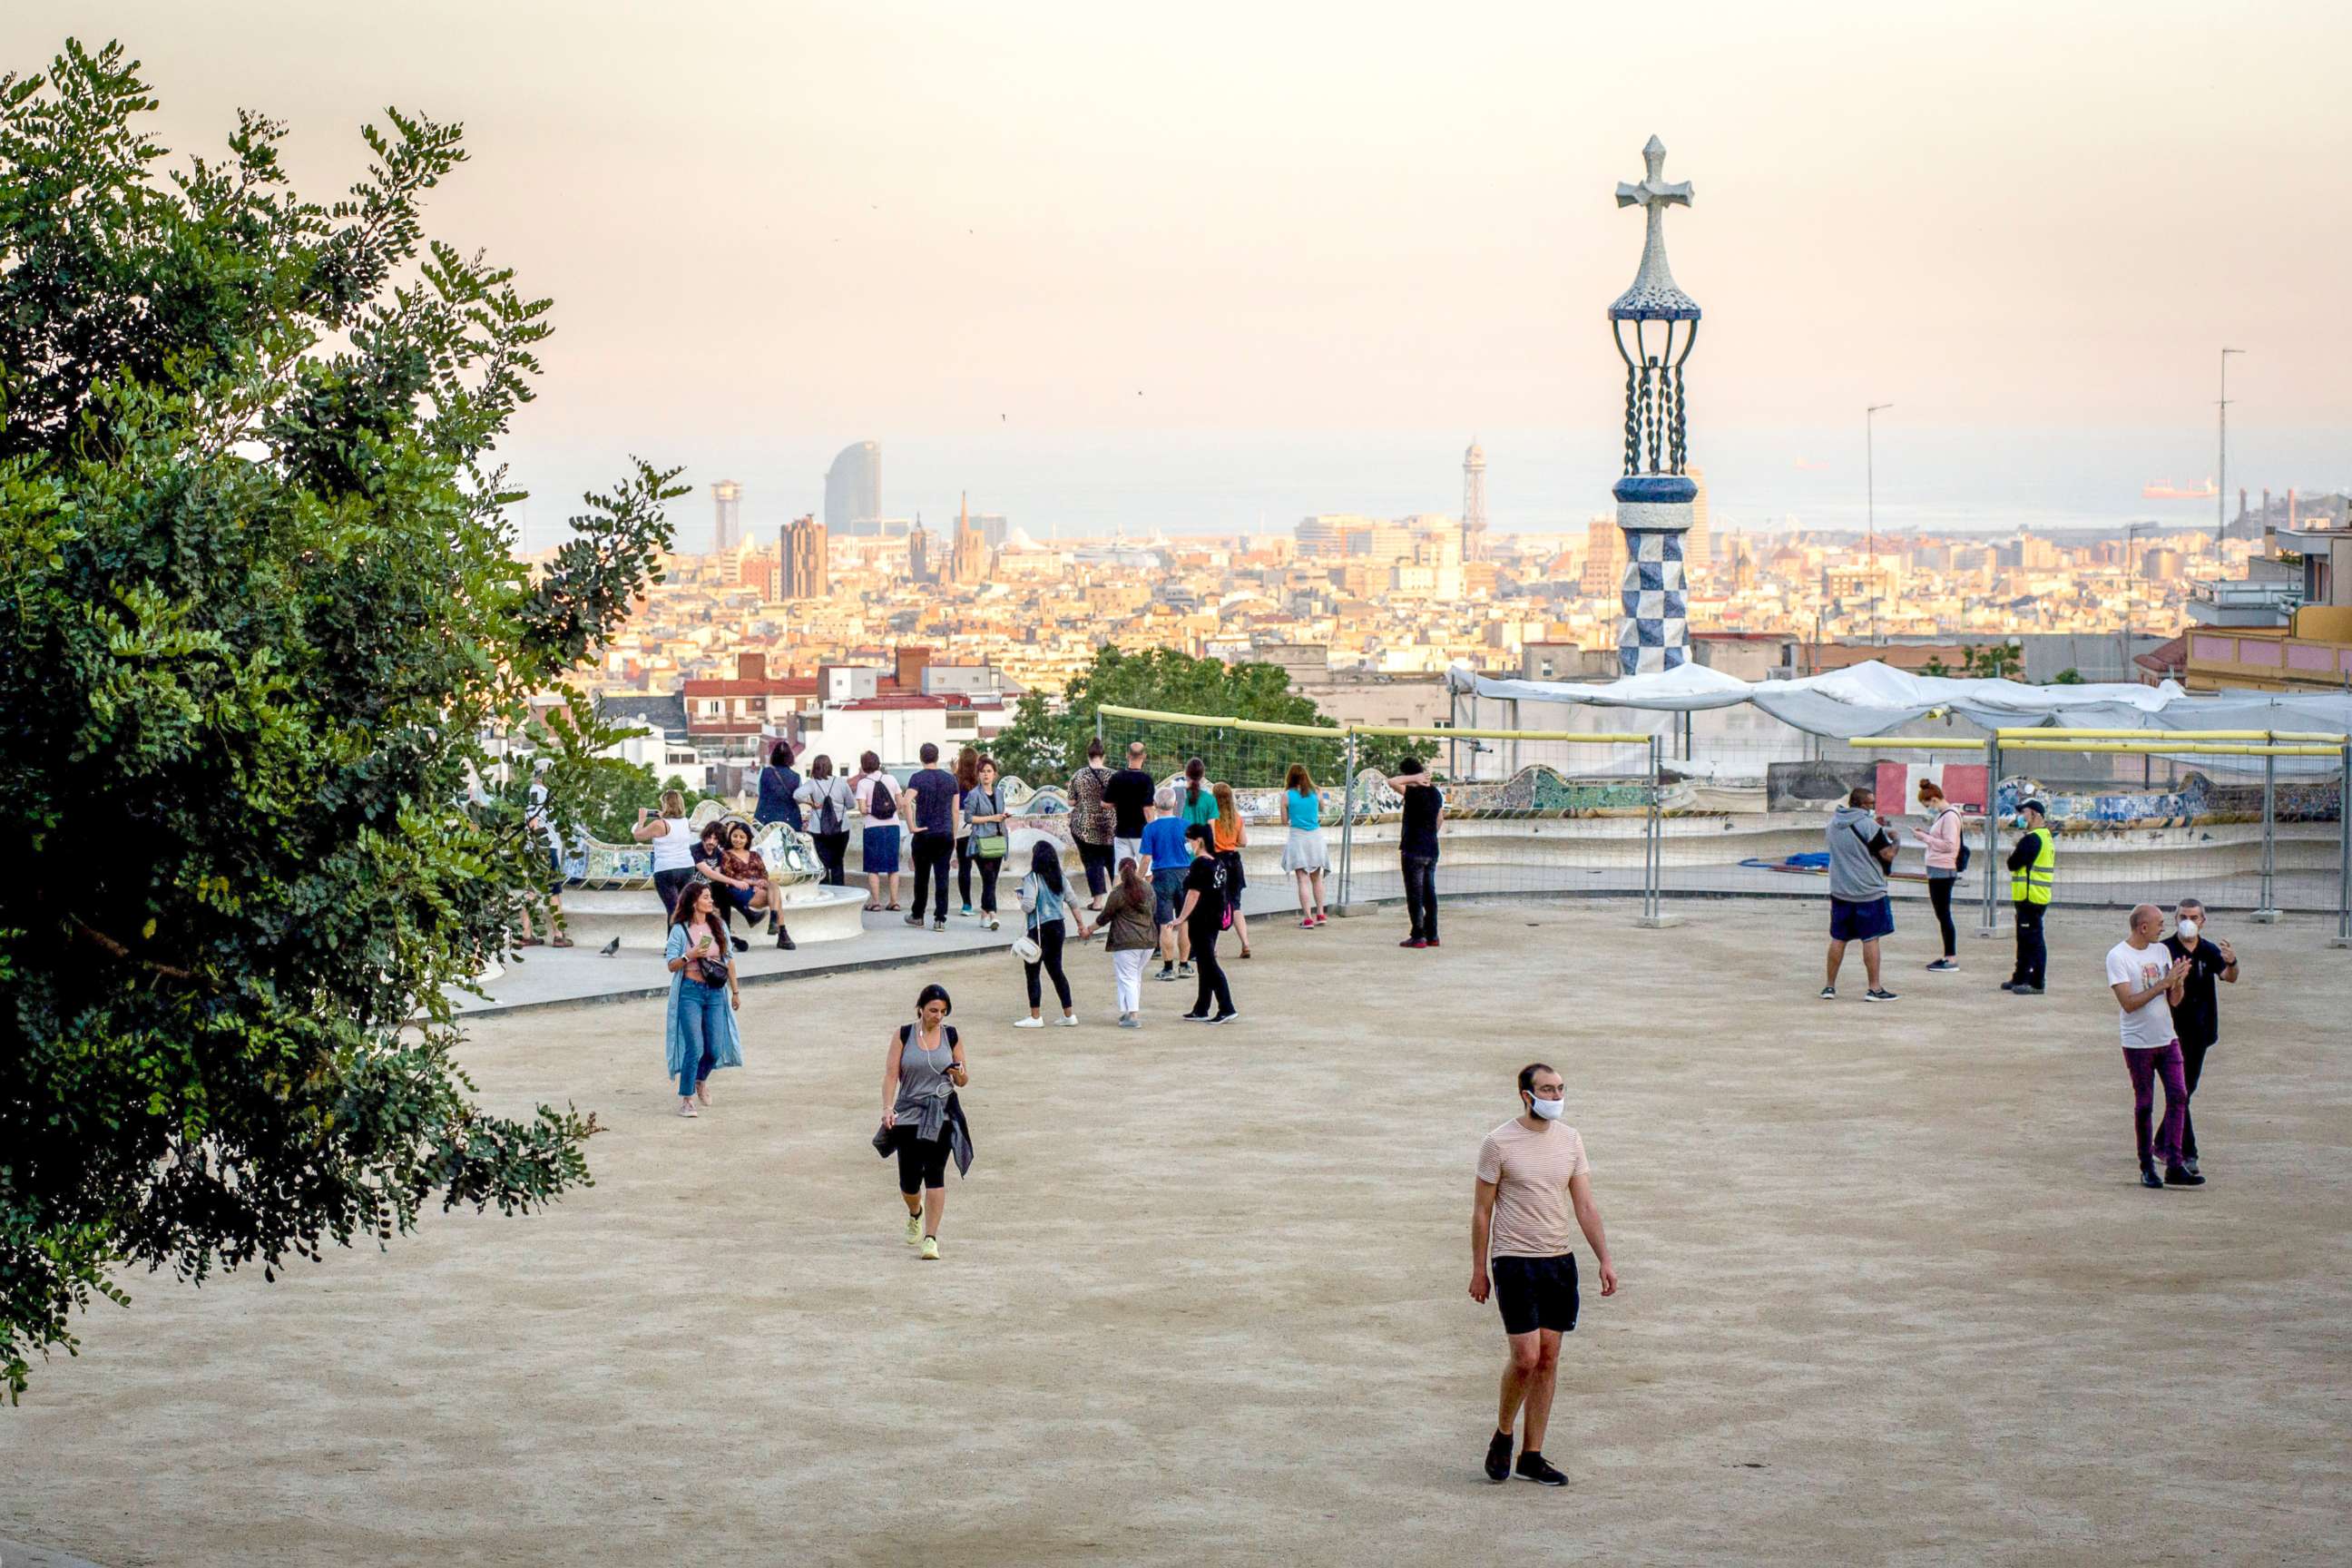 PHOTO: People in Barcelona visit the Guell Park on May 20, 2020.